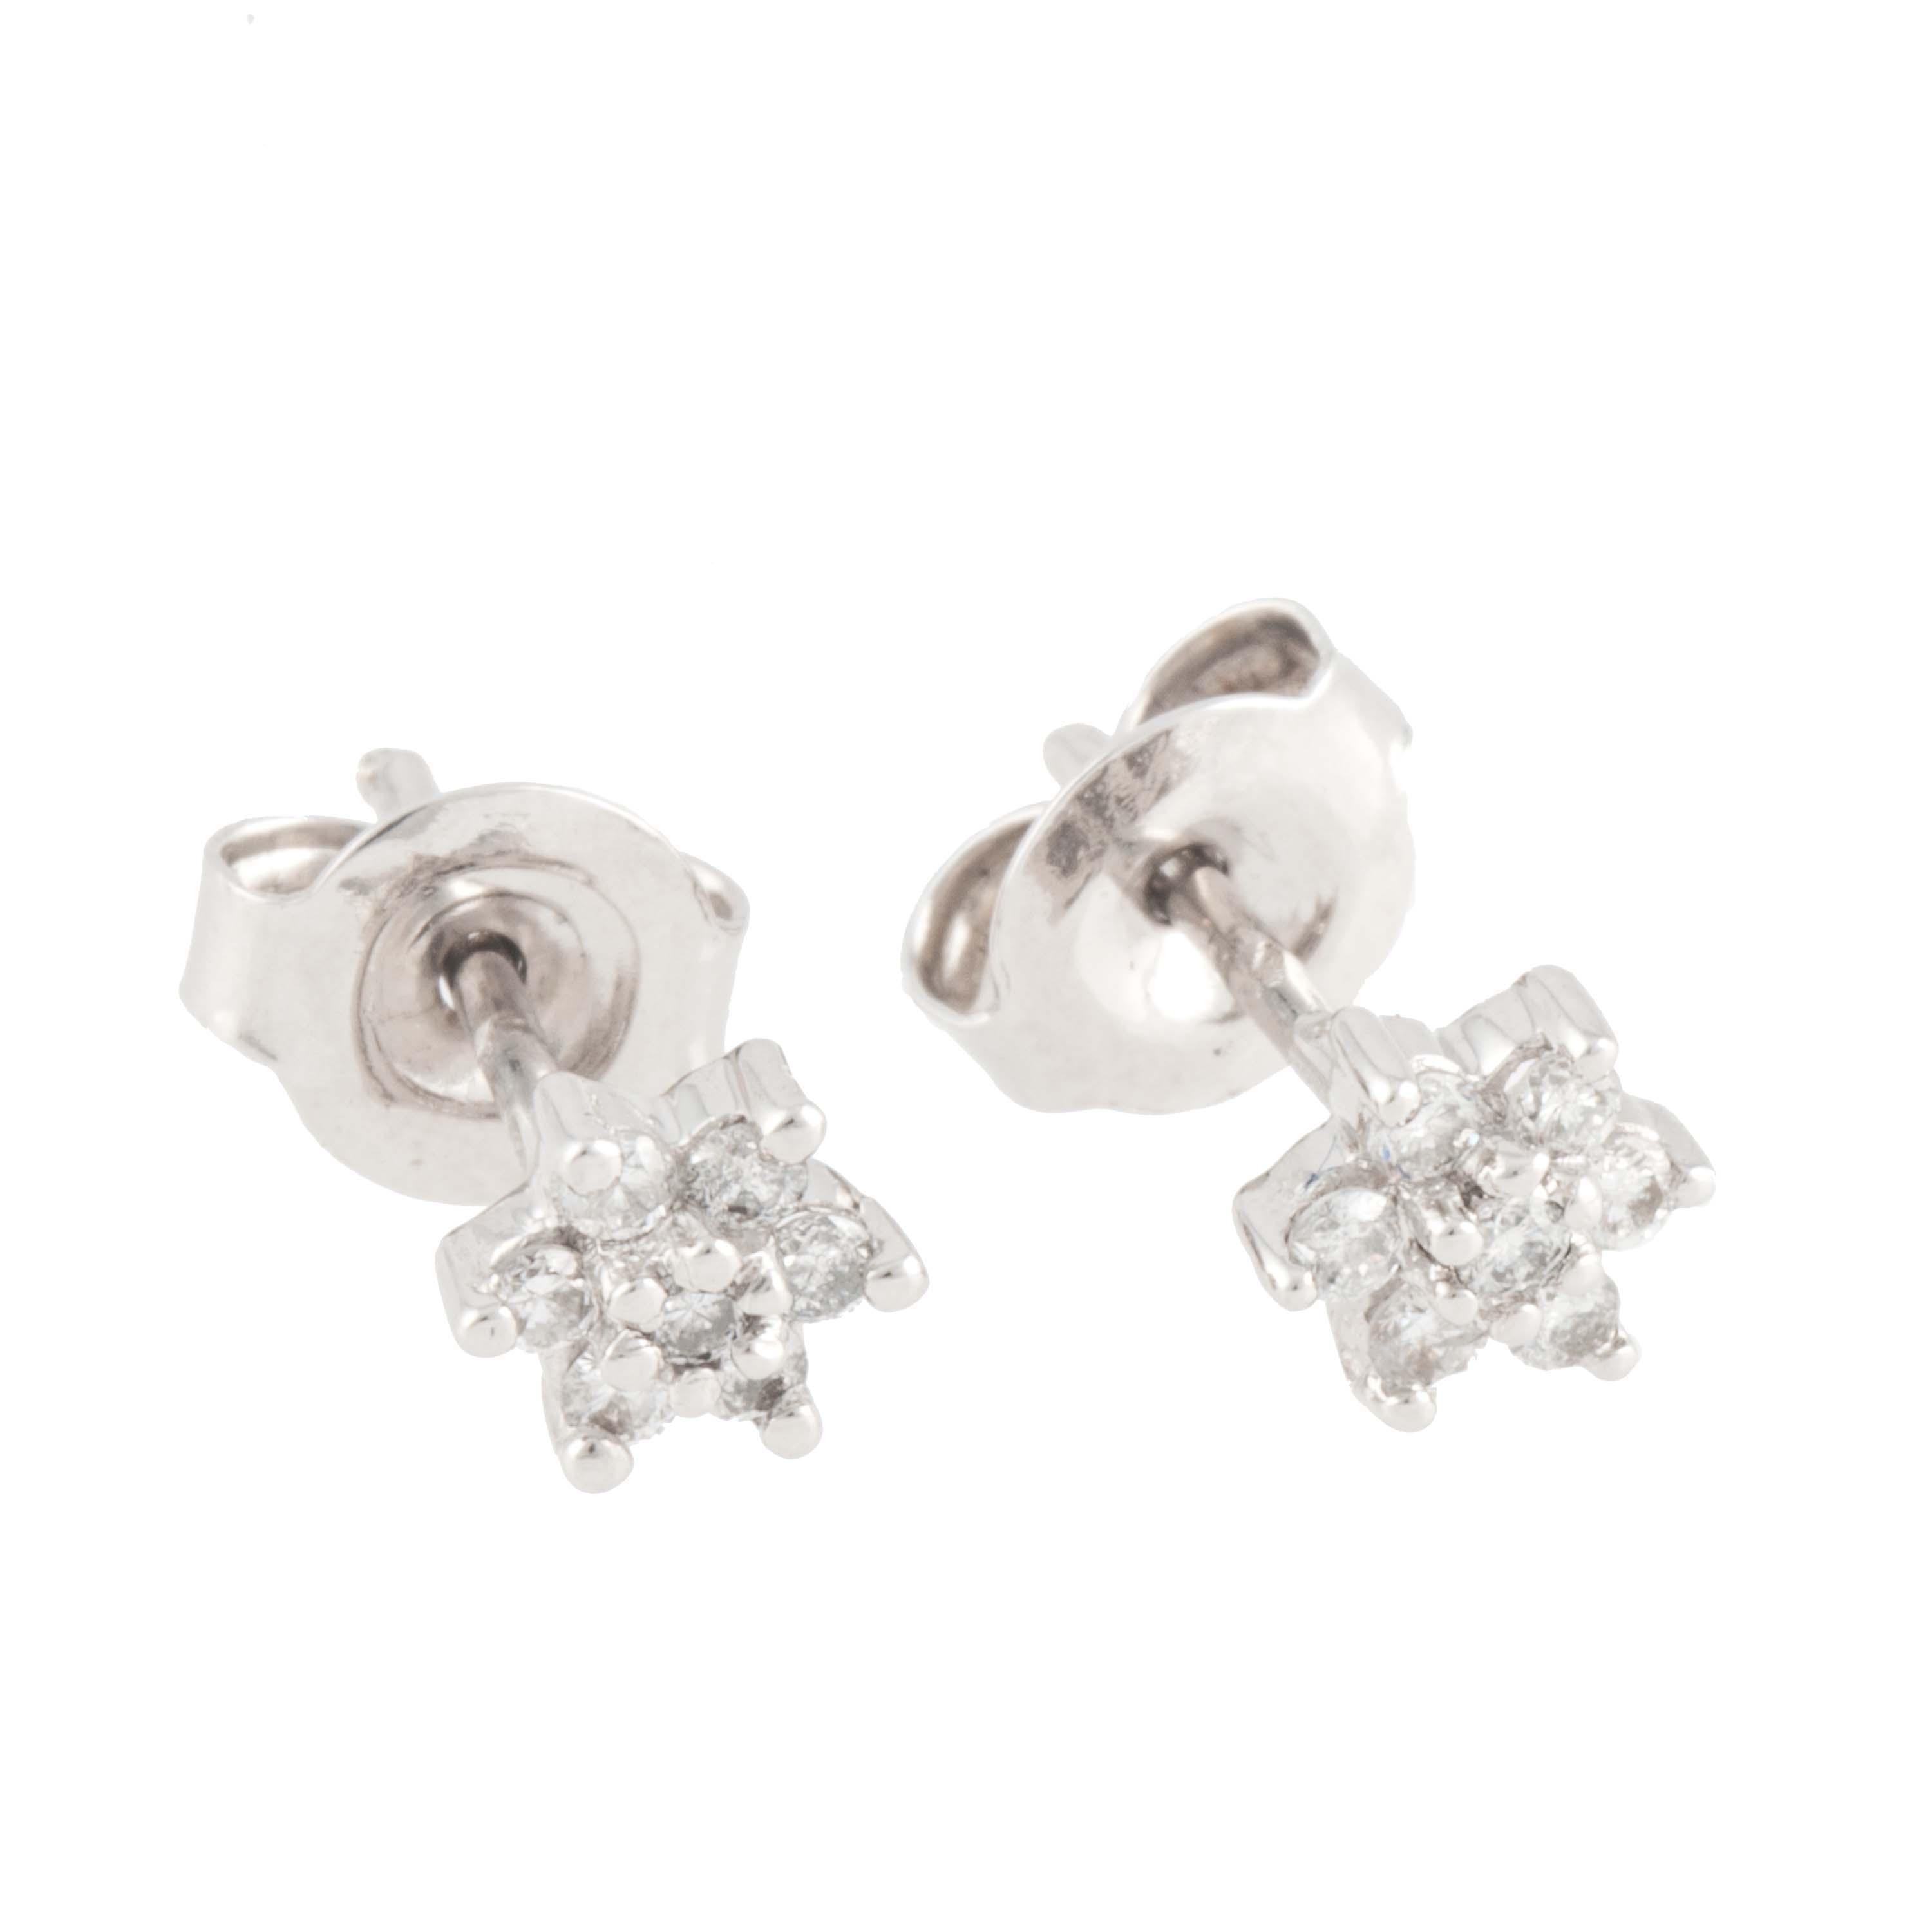 WHITE GOLD AND DIAMOND EARRINGS.